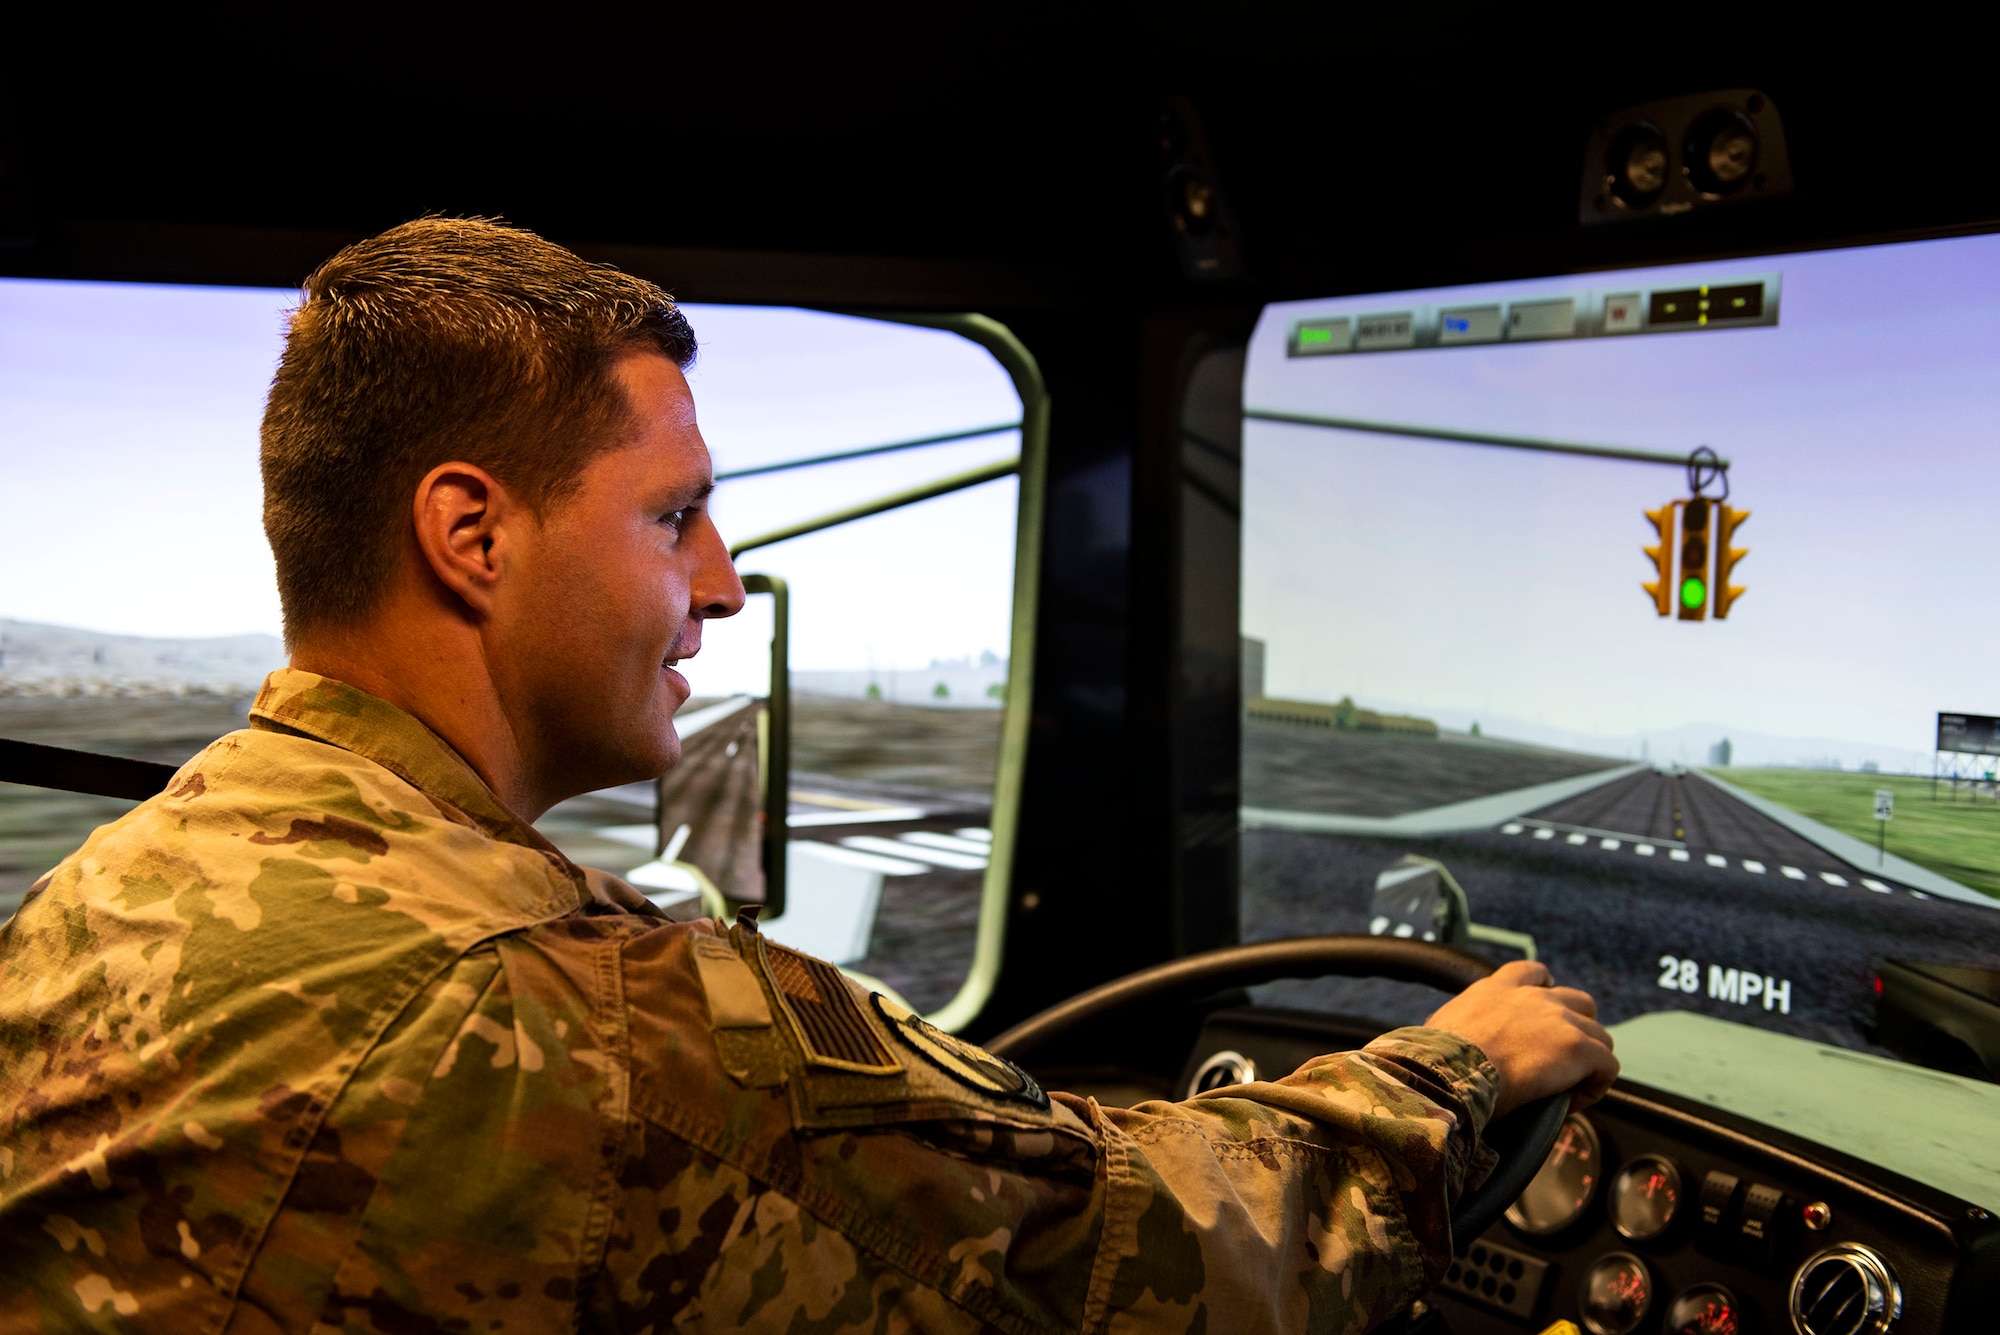 Staff Sgt. Kenneth Hemshrot, 23d Logistics Readiness Squadron ground transportation NCO in charge of operators, records and licensing, demonstrates how the vehicle simulator works, Aug. 12, 2019, at Moody Air Force Base, Ga. The simulator allows Airmen to safely familiarize themselves with the vehicles and scenarios they may experience in the real world. This supplements the training Airmen do in real vehicles, helping to cut back on the wear and tear of them. (U.S. Air Force photo by Senior Airman Erick Requadt)